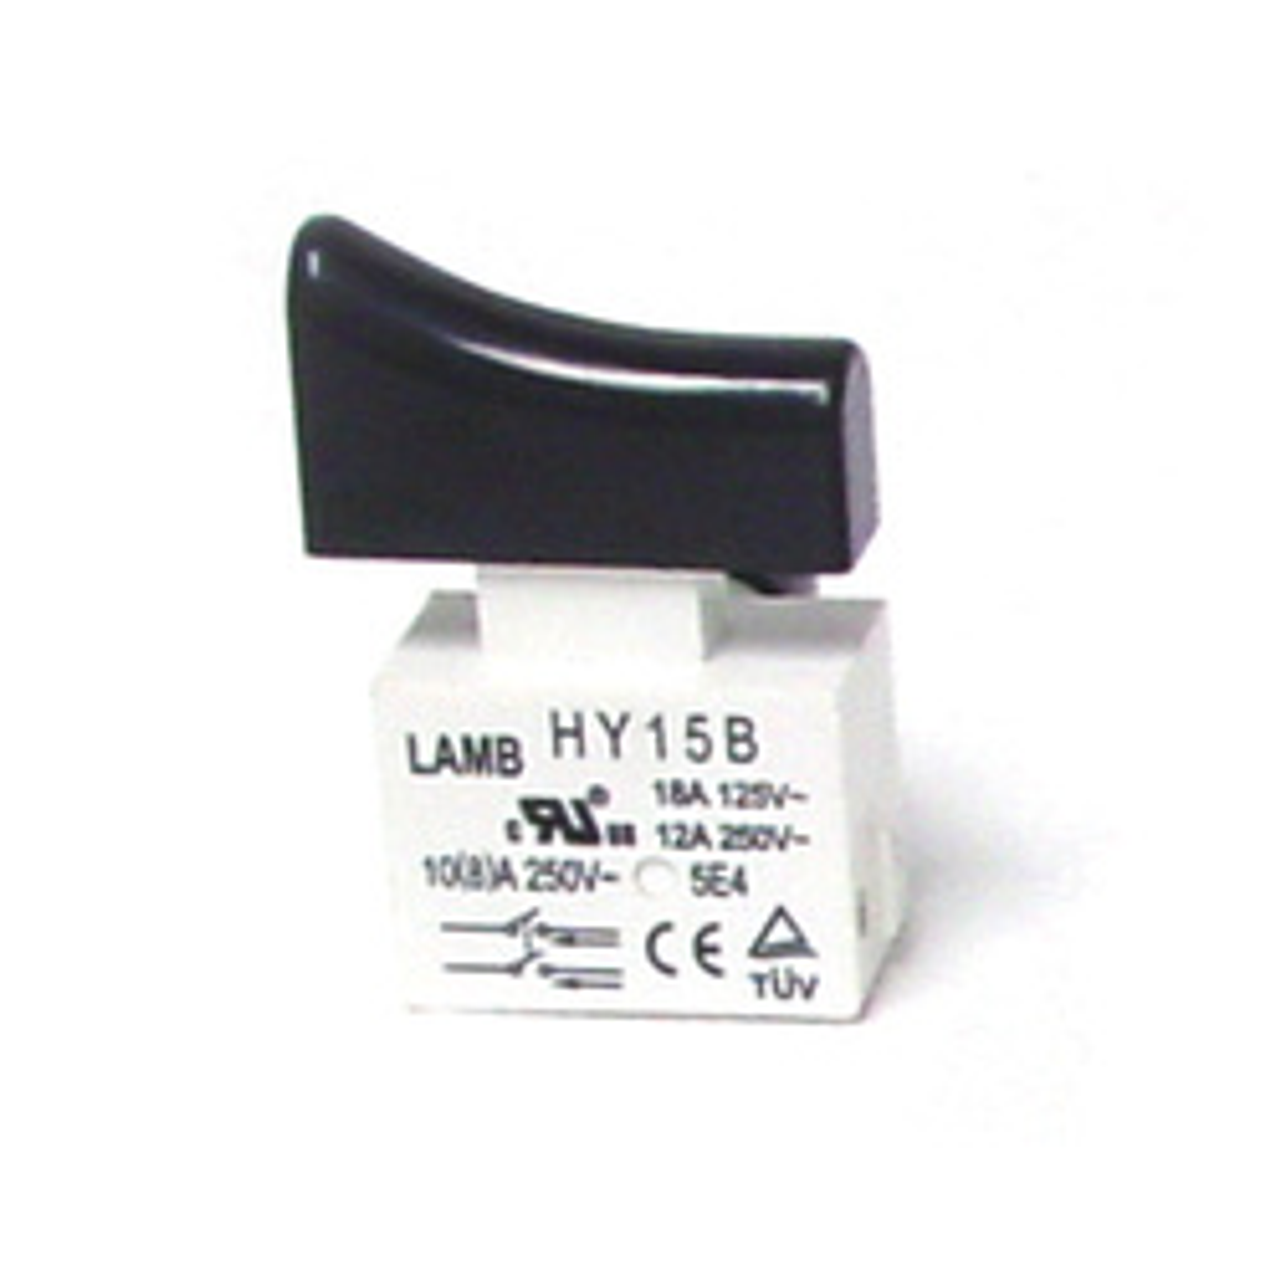 E-Switch HY106-64R-421-0000 Tool and Trigger Switches